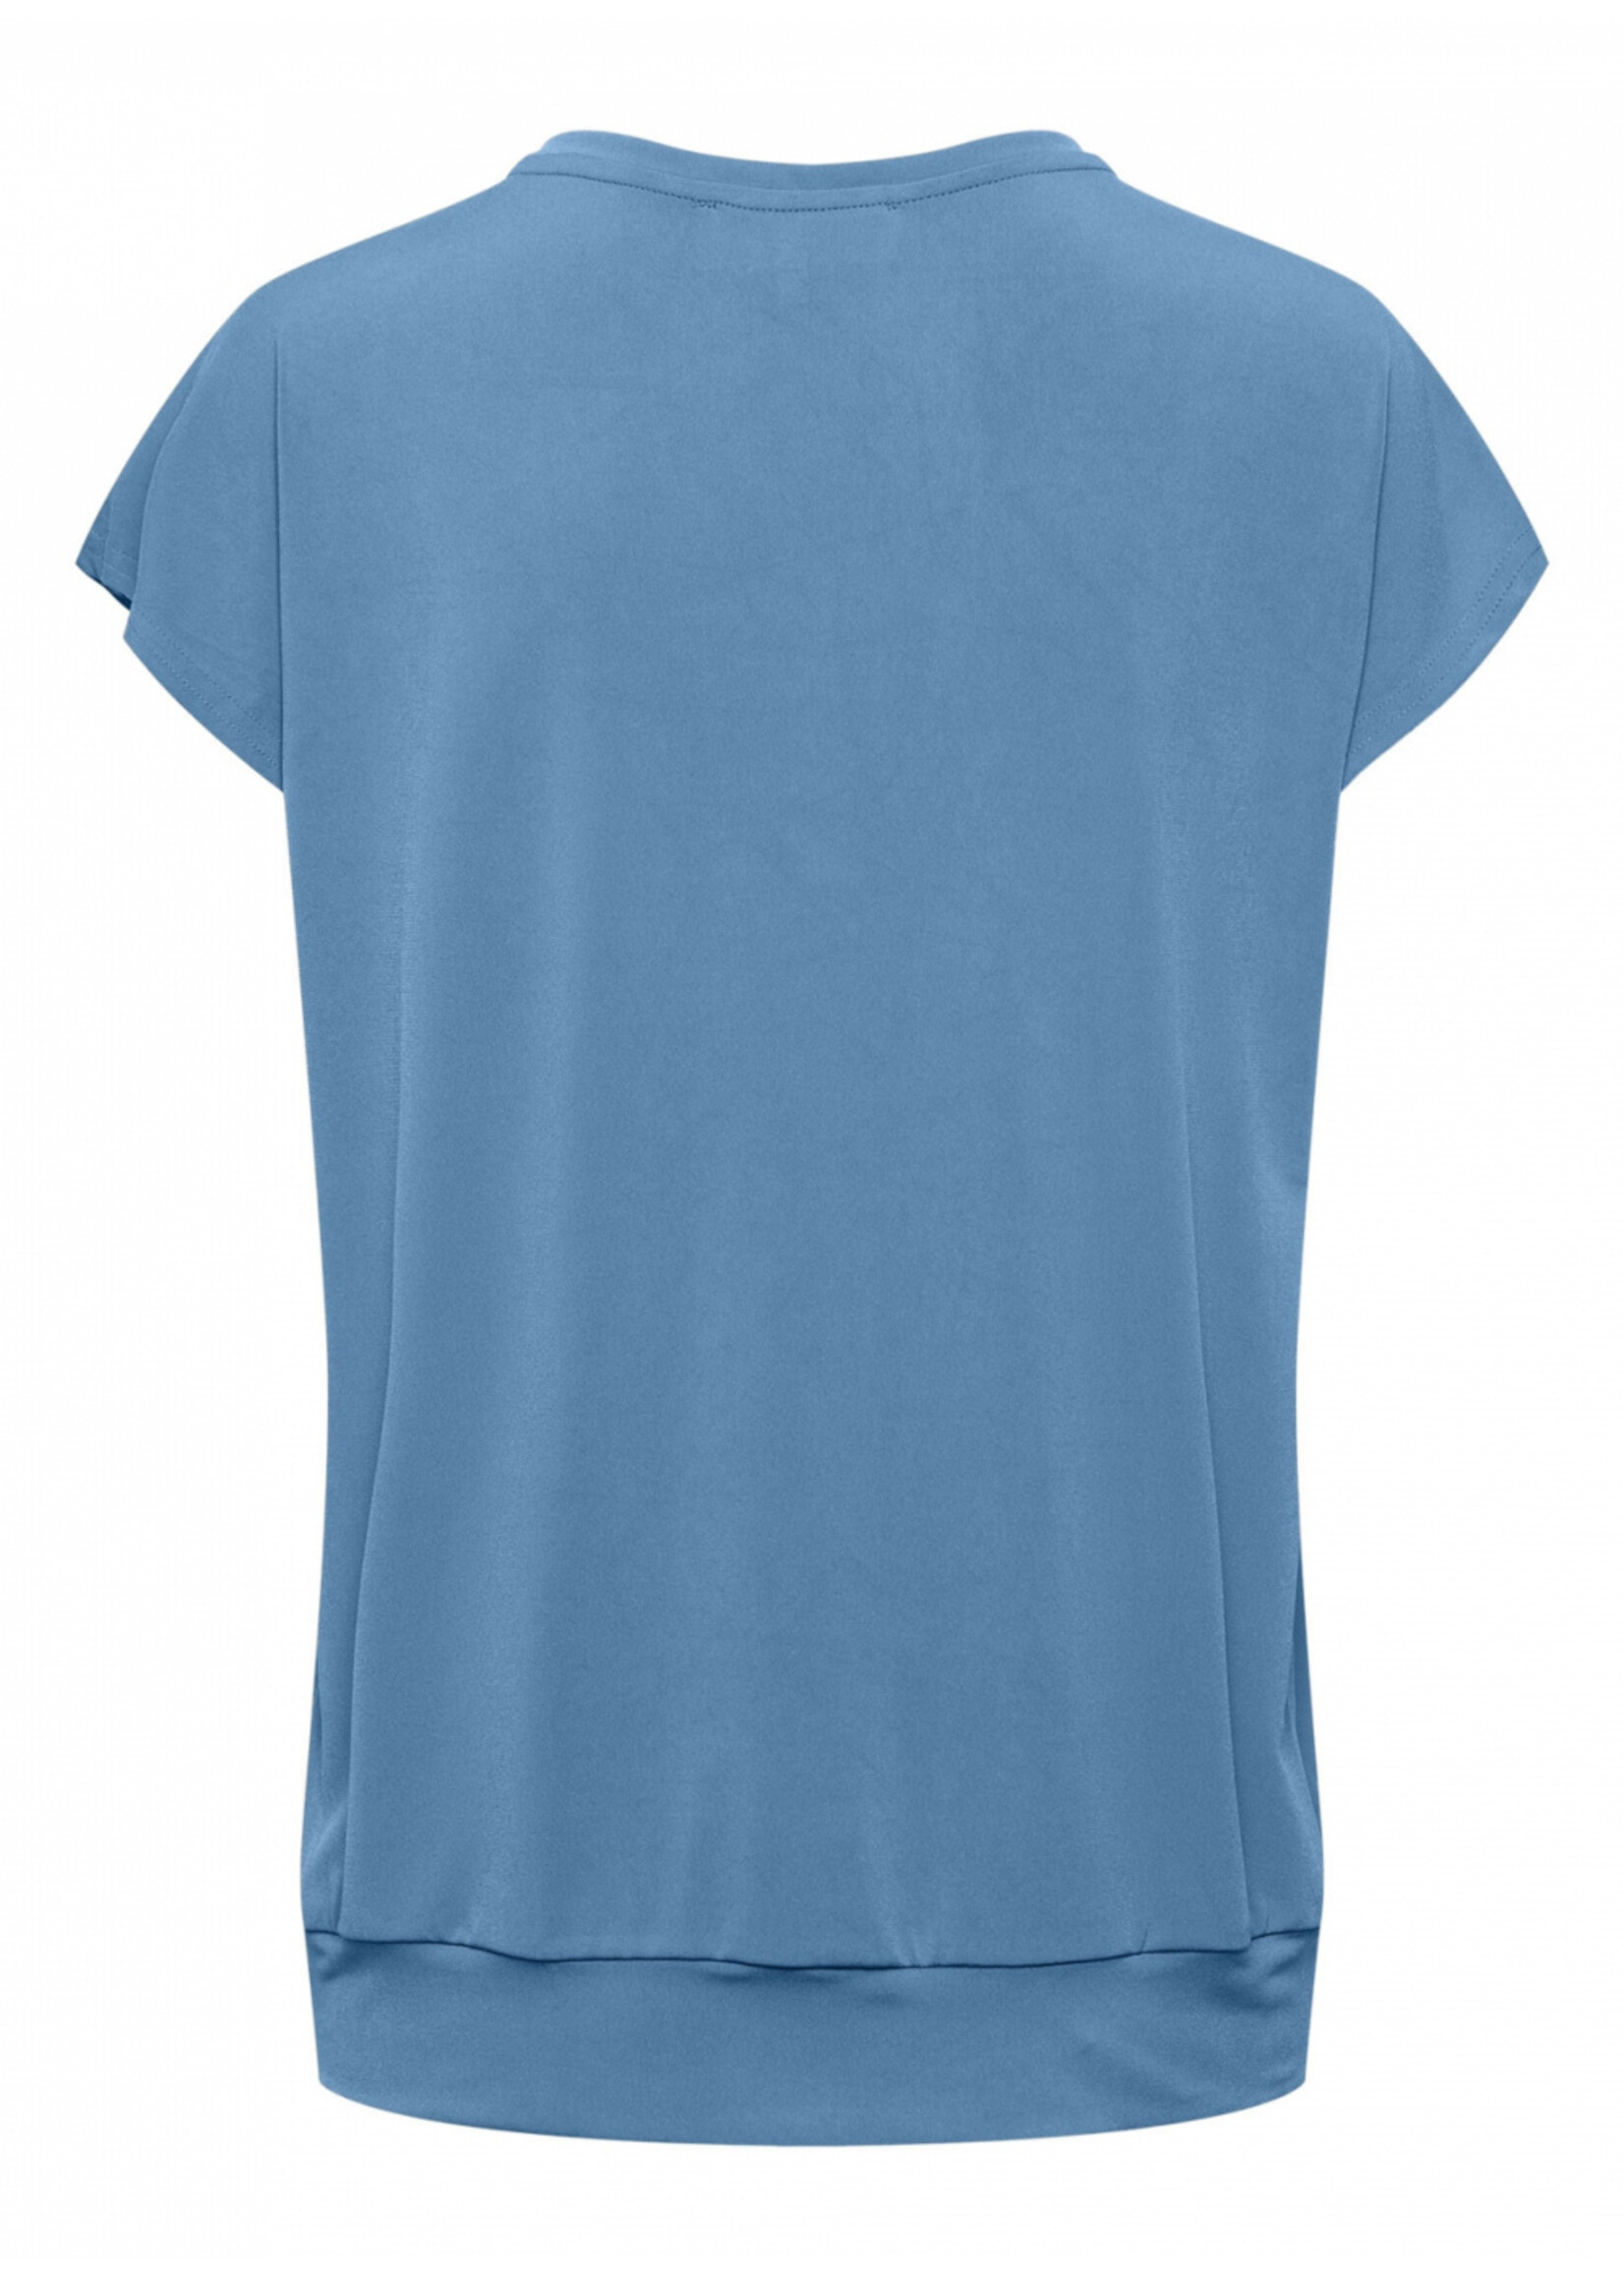 &Co woman Top lucia light denim to190